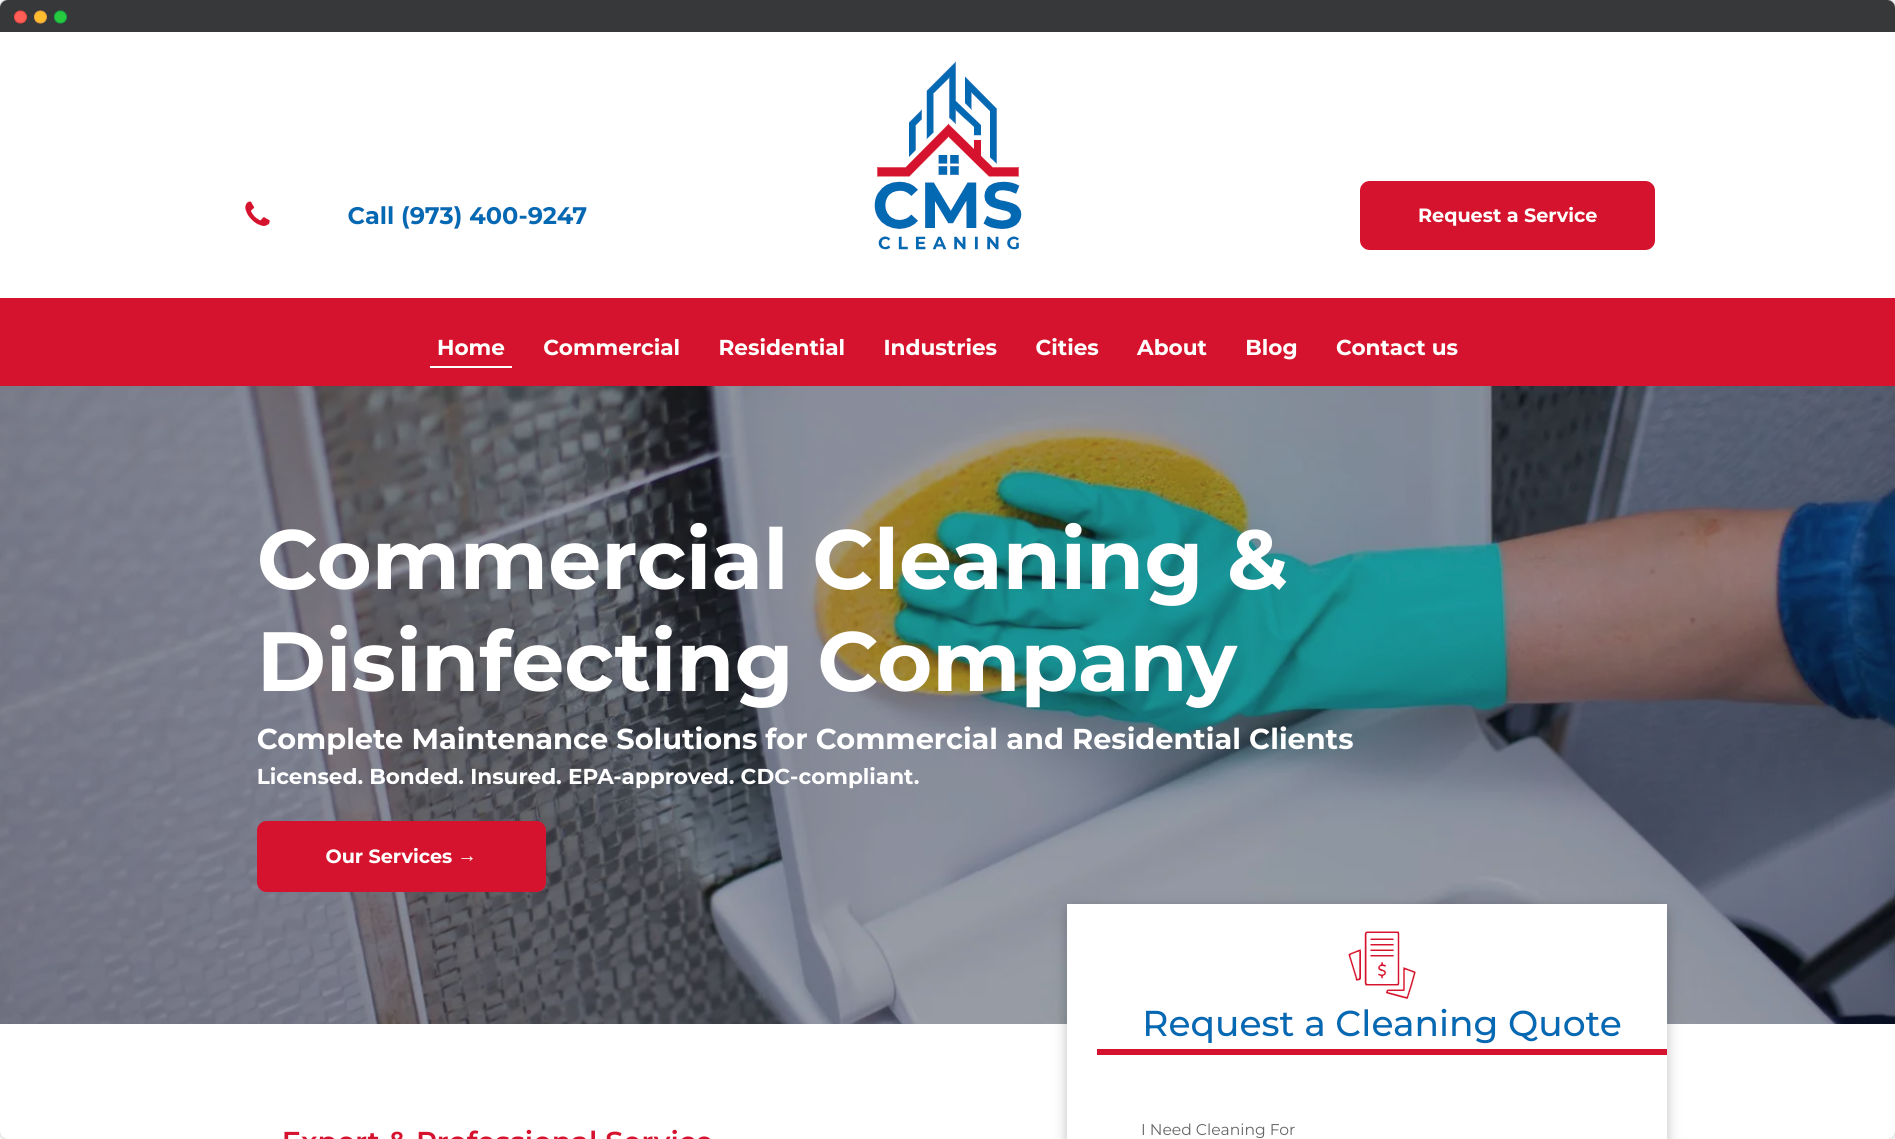 CMS Cleaning website case study